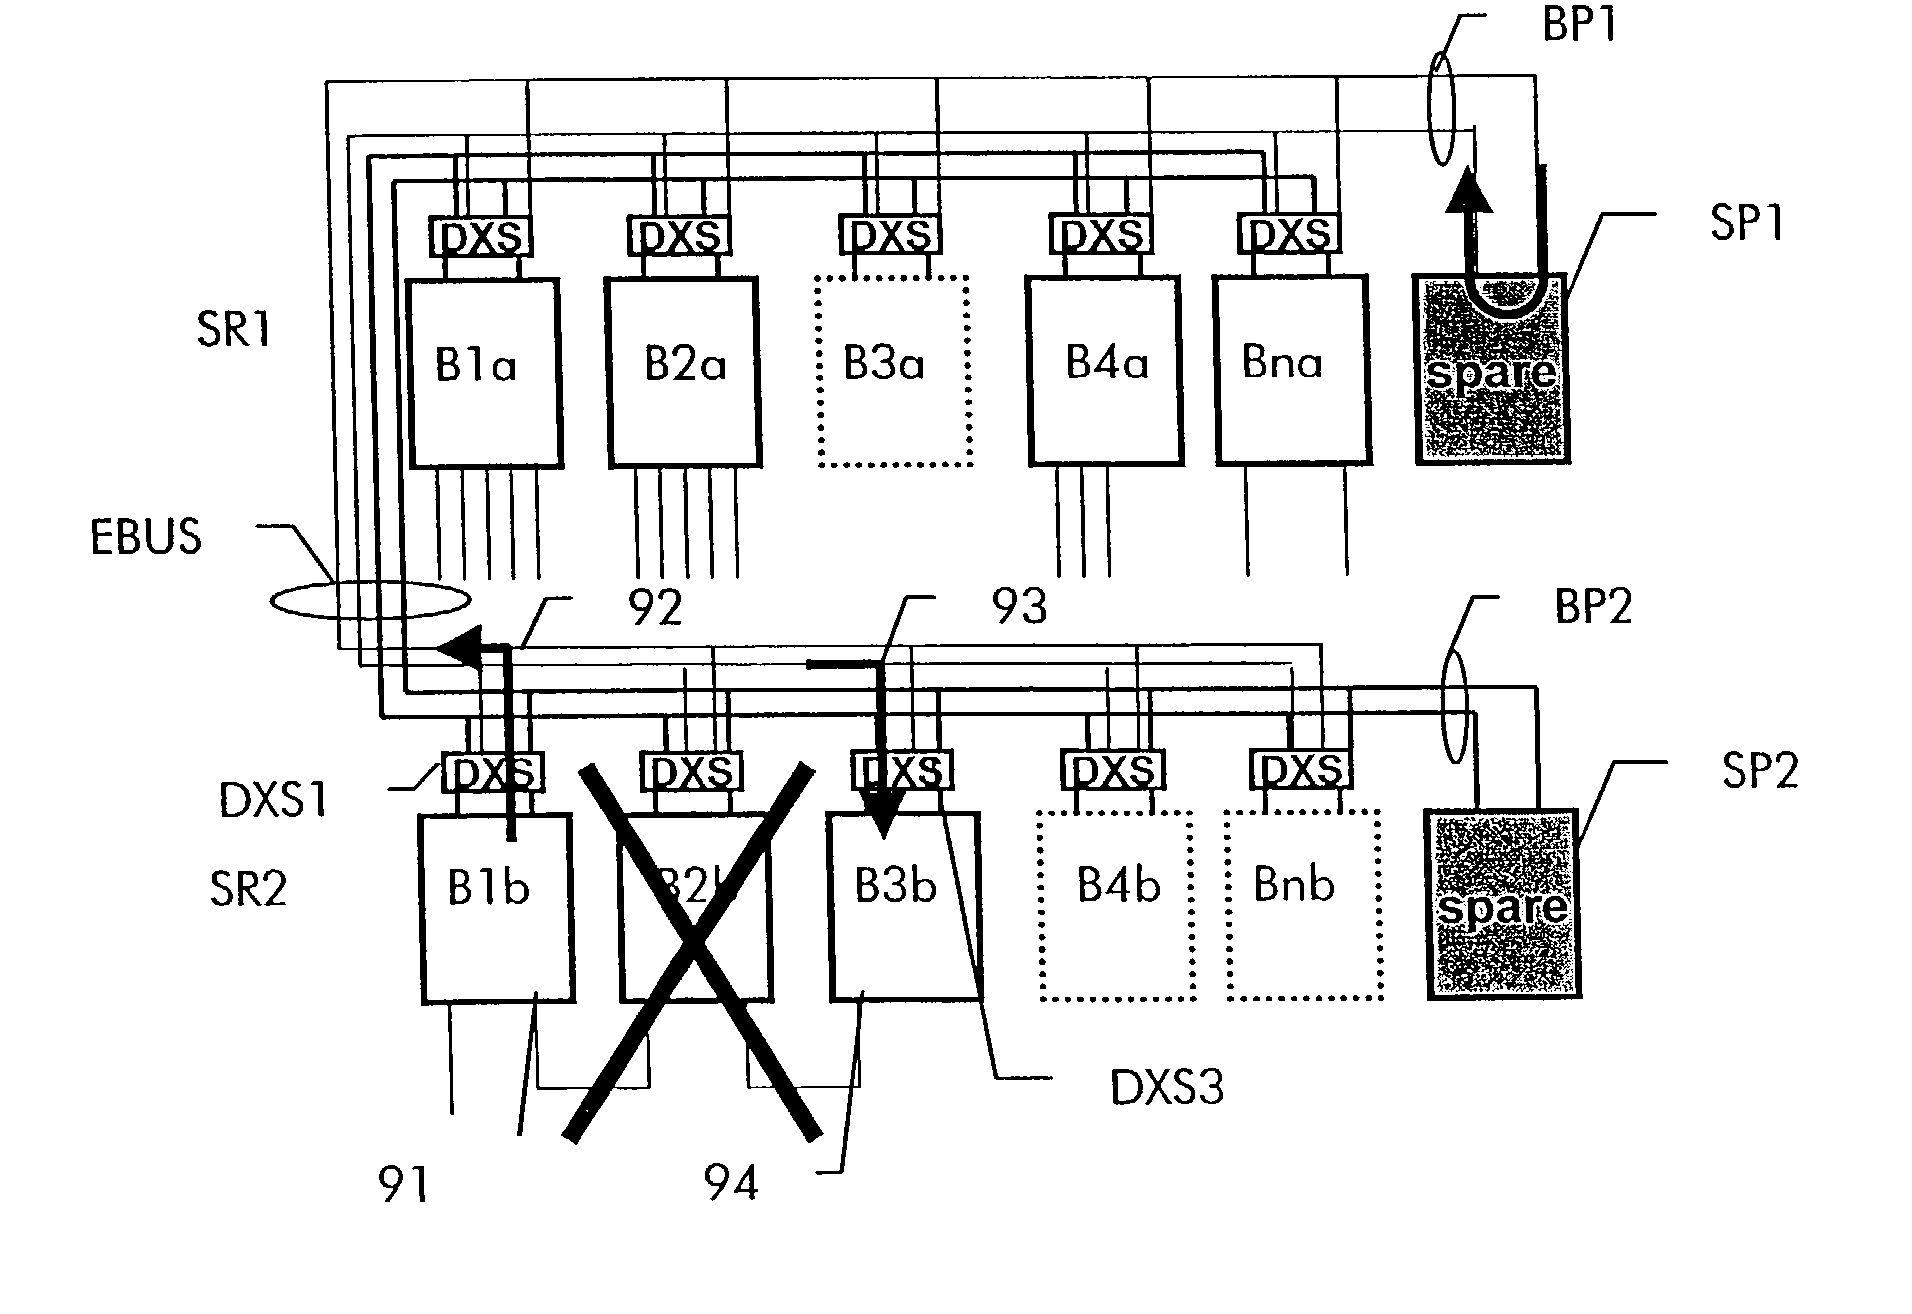 Method and apparatus for healing of failures for chained boards with SDH interfaces